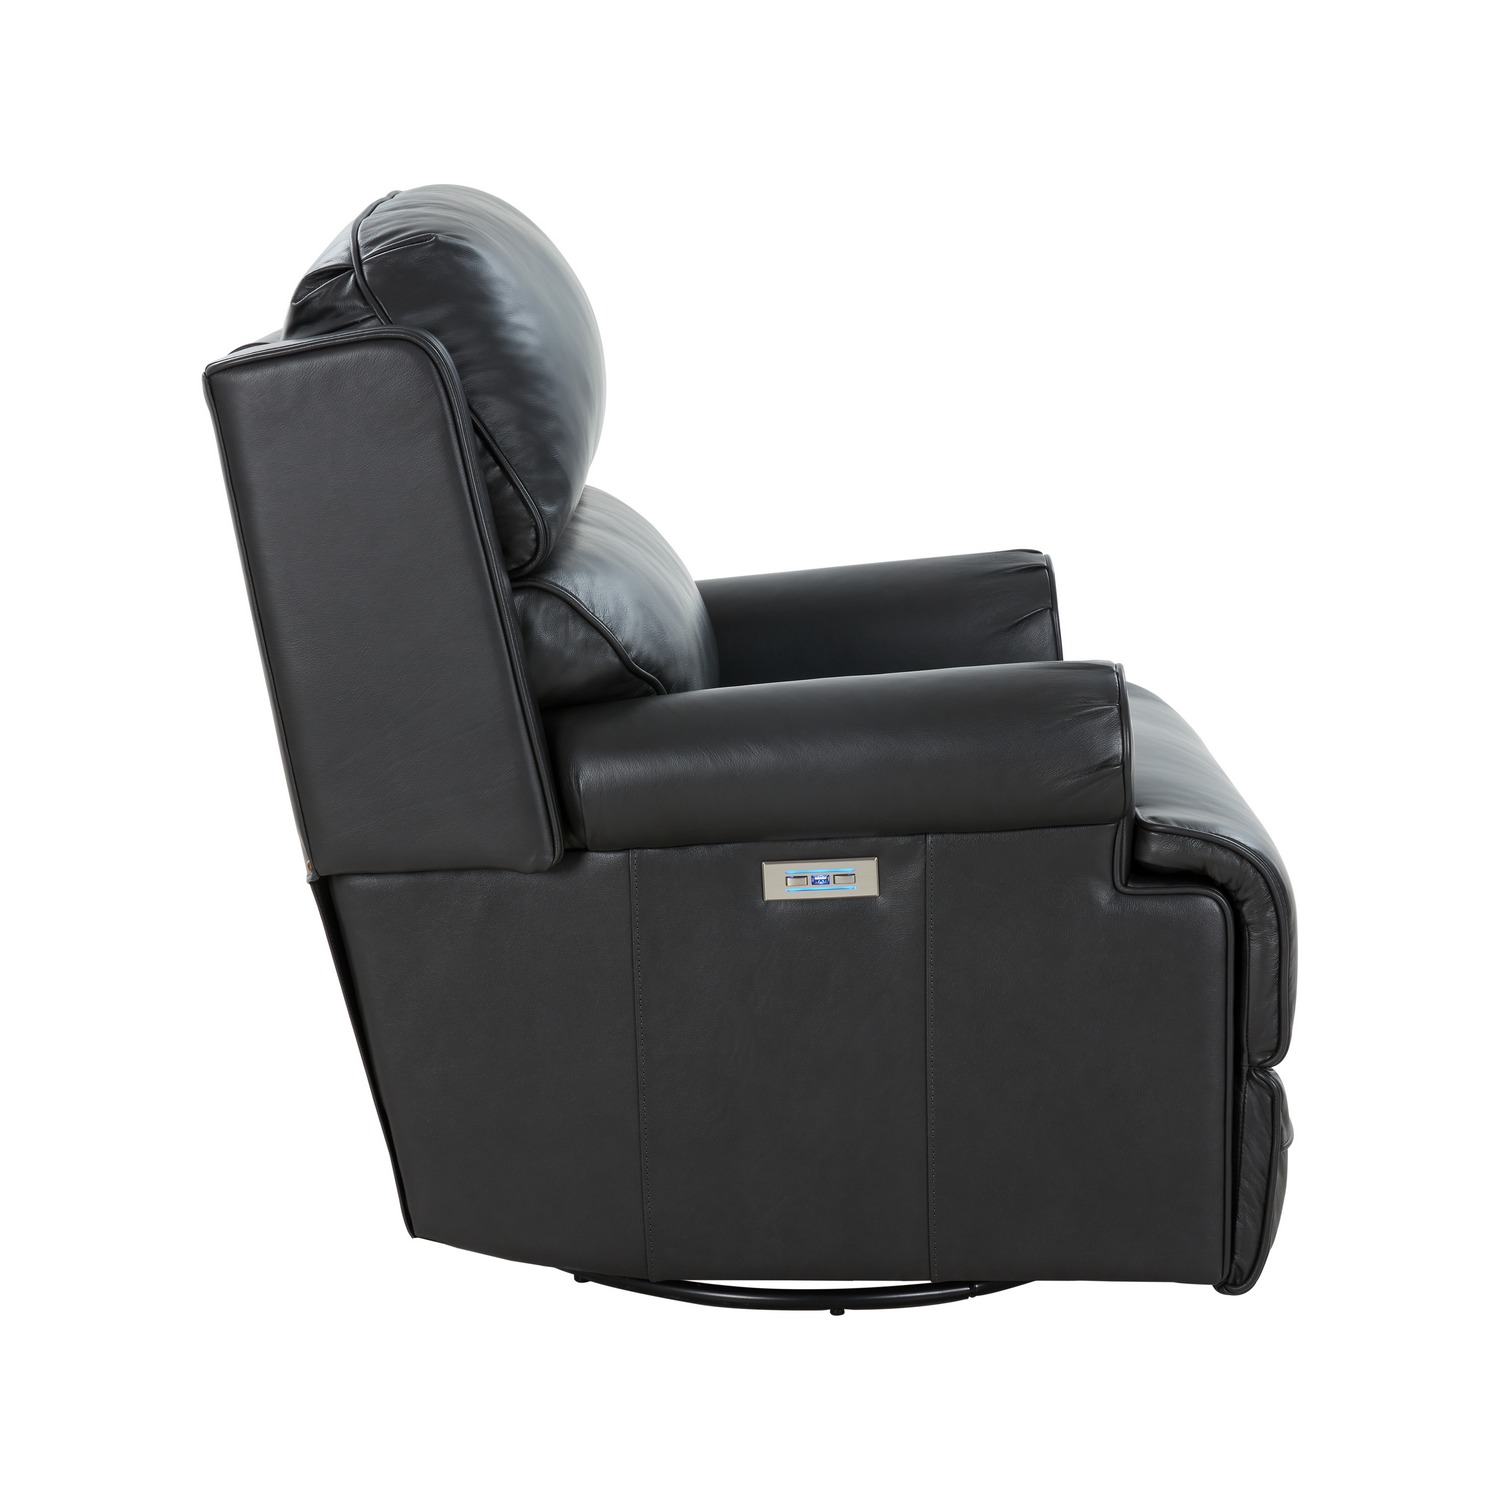 Barcalounger The Club Power Swivel Glider Recliner Chair - Shoreham Gray/All Leather